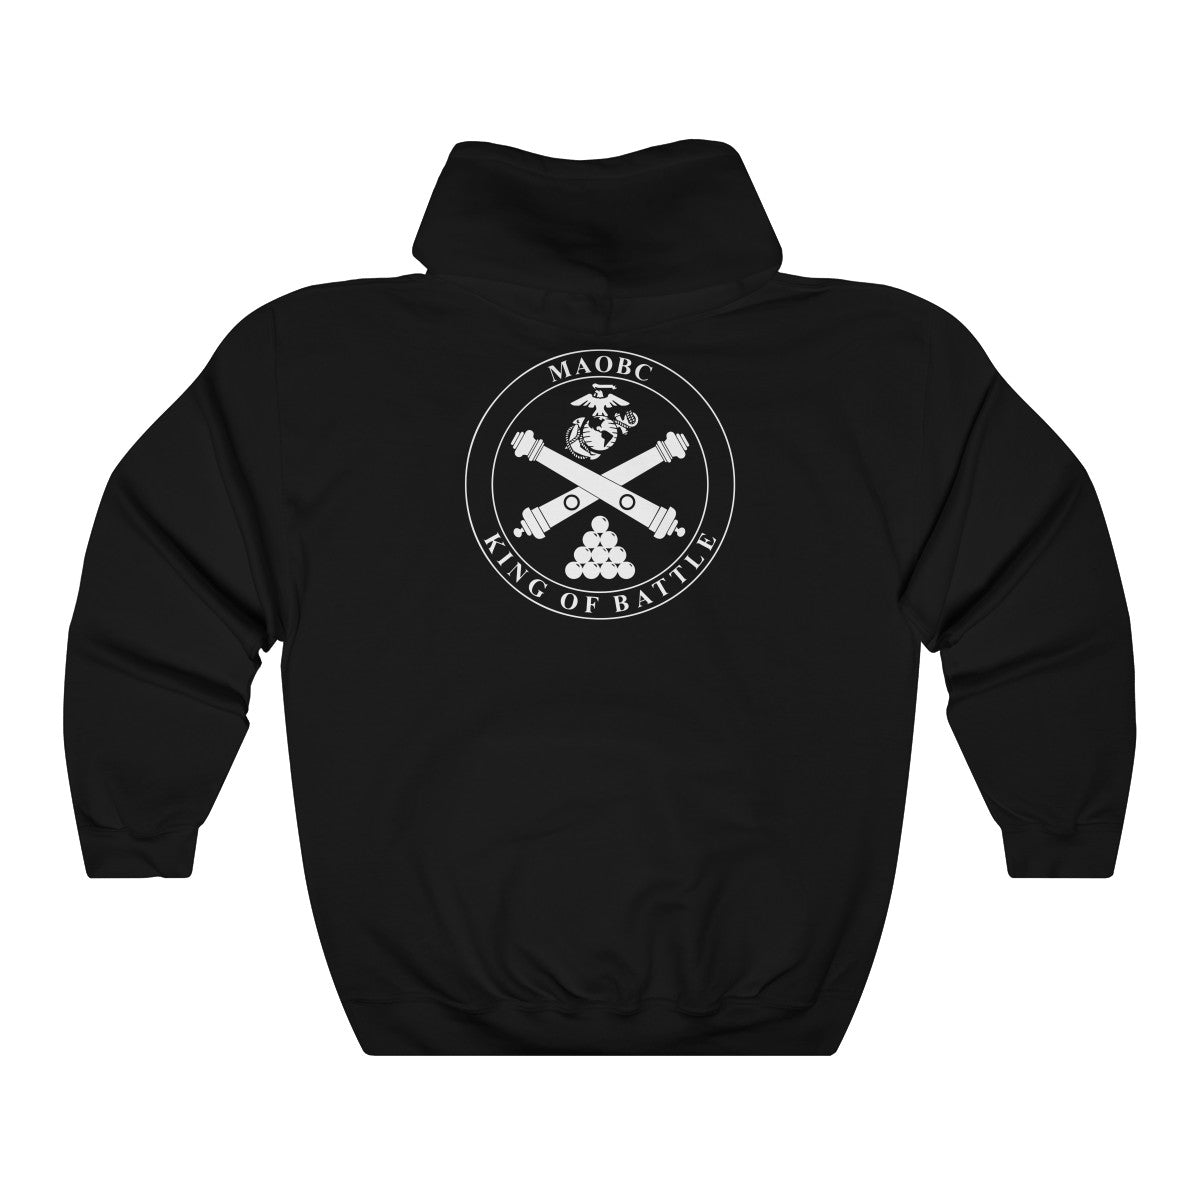 MAOBC CO Hoodie